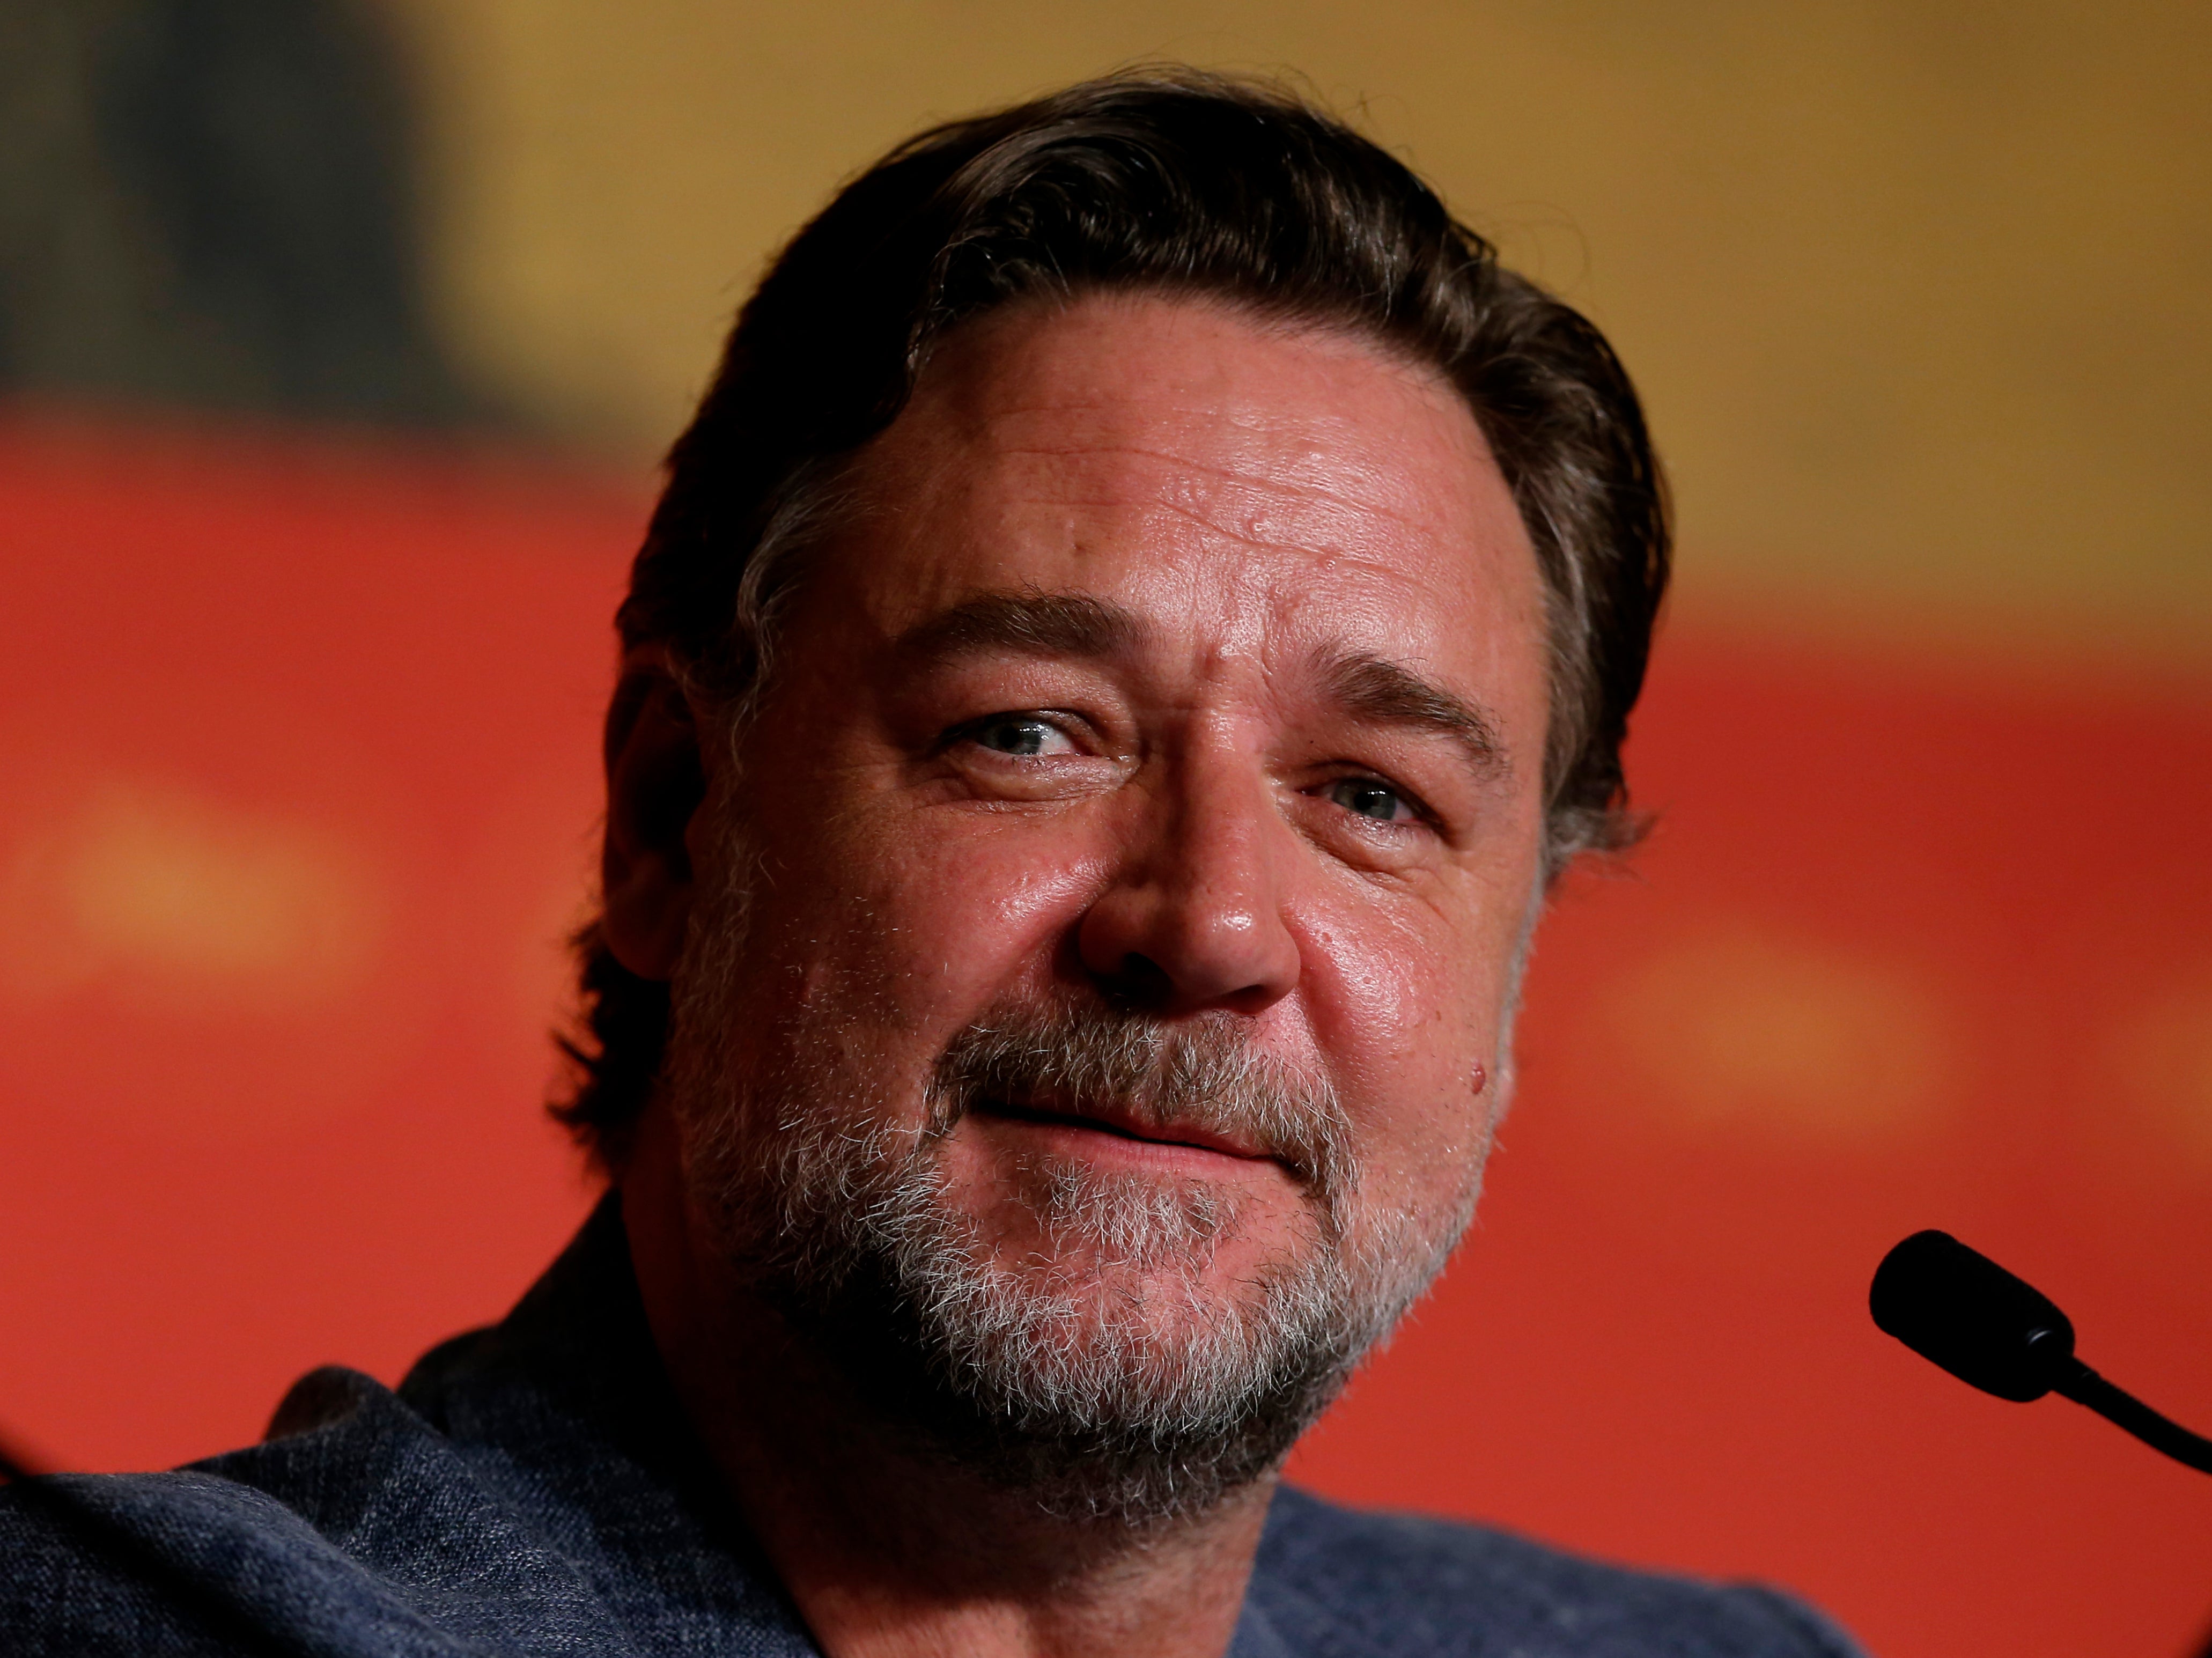 Russell Crowe was said to have auditioned for ‘My Best Friend’s Wedding’